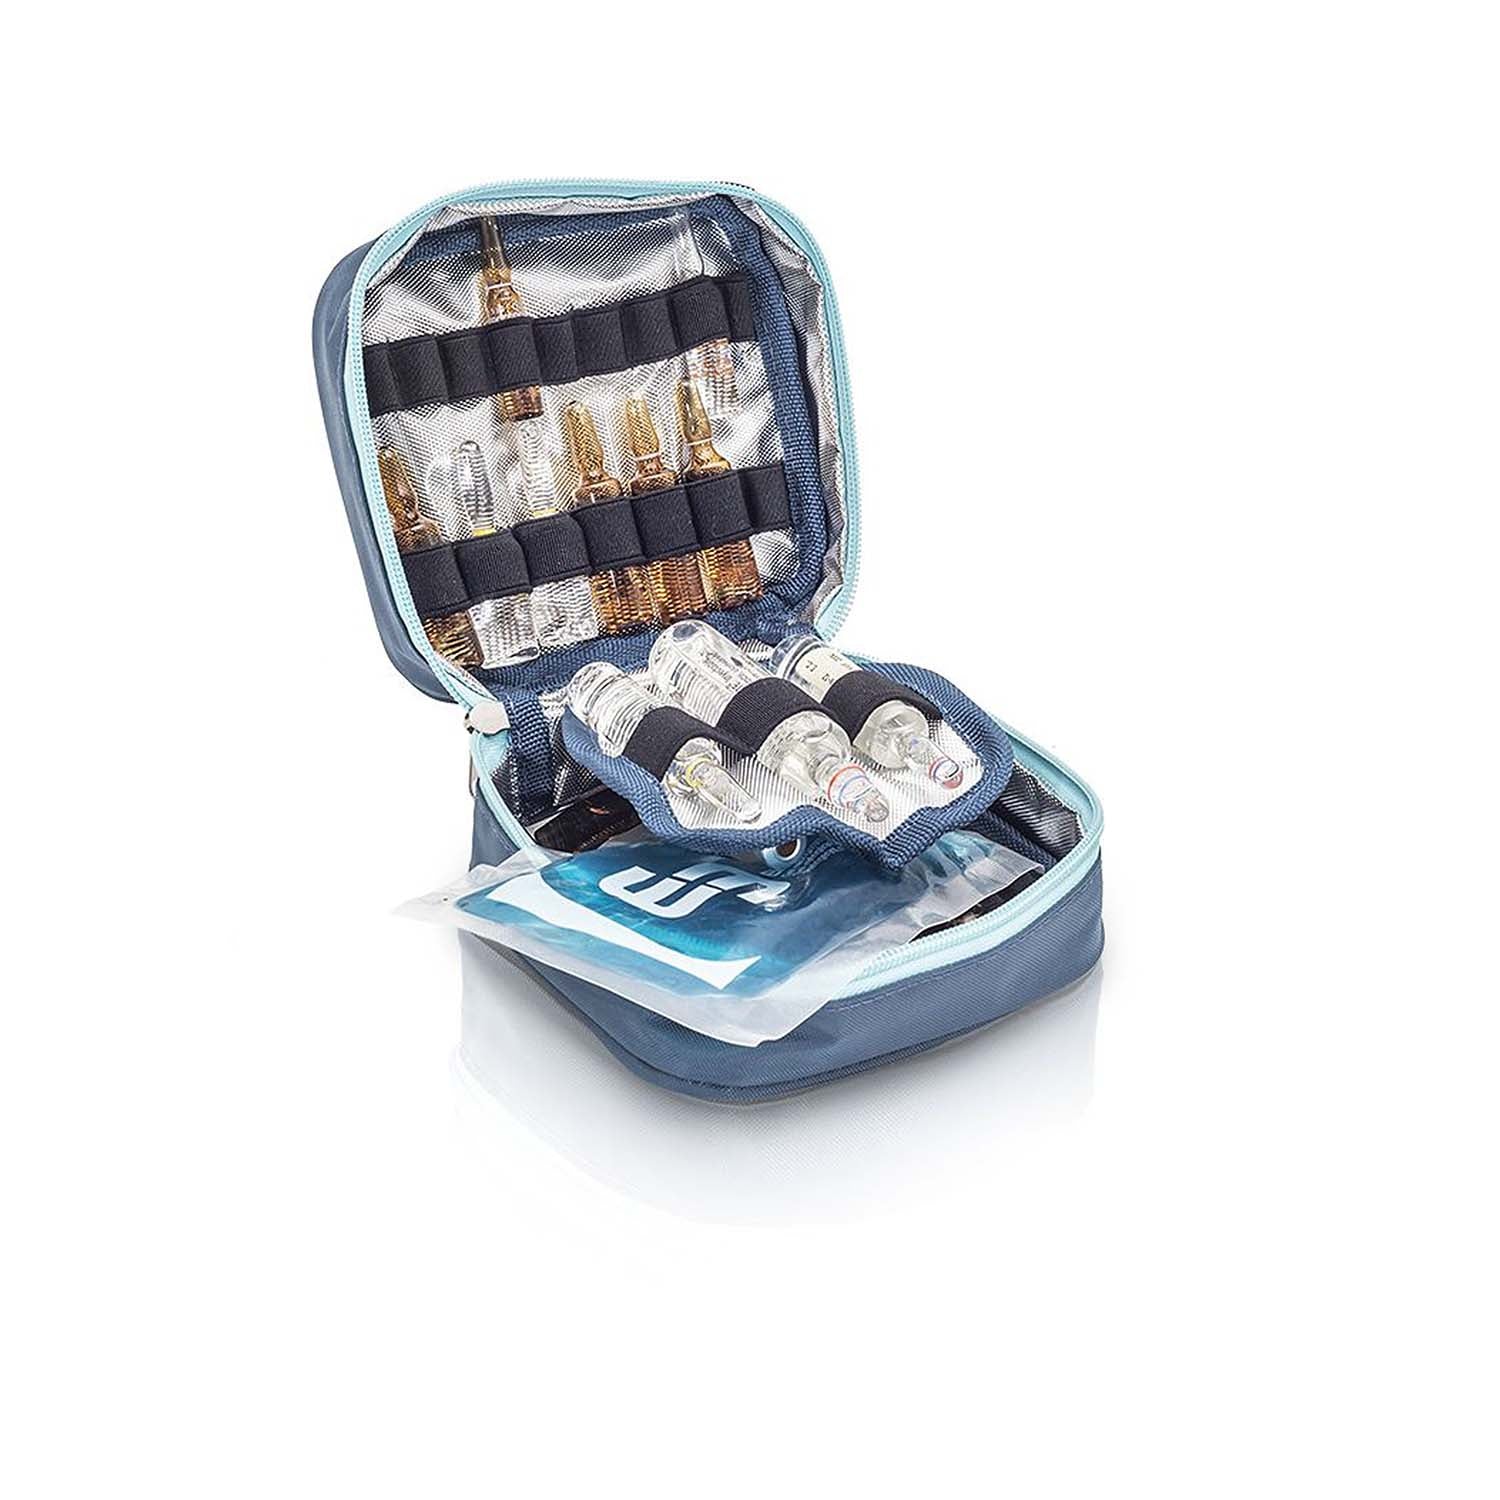 The Medical Assistance Briefcase | Blue (PRACTI'S) (3)